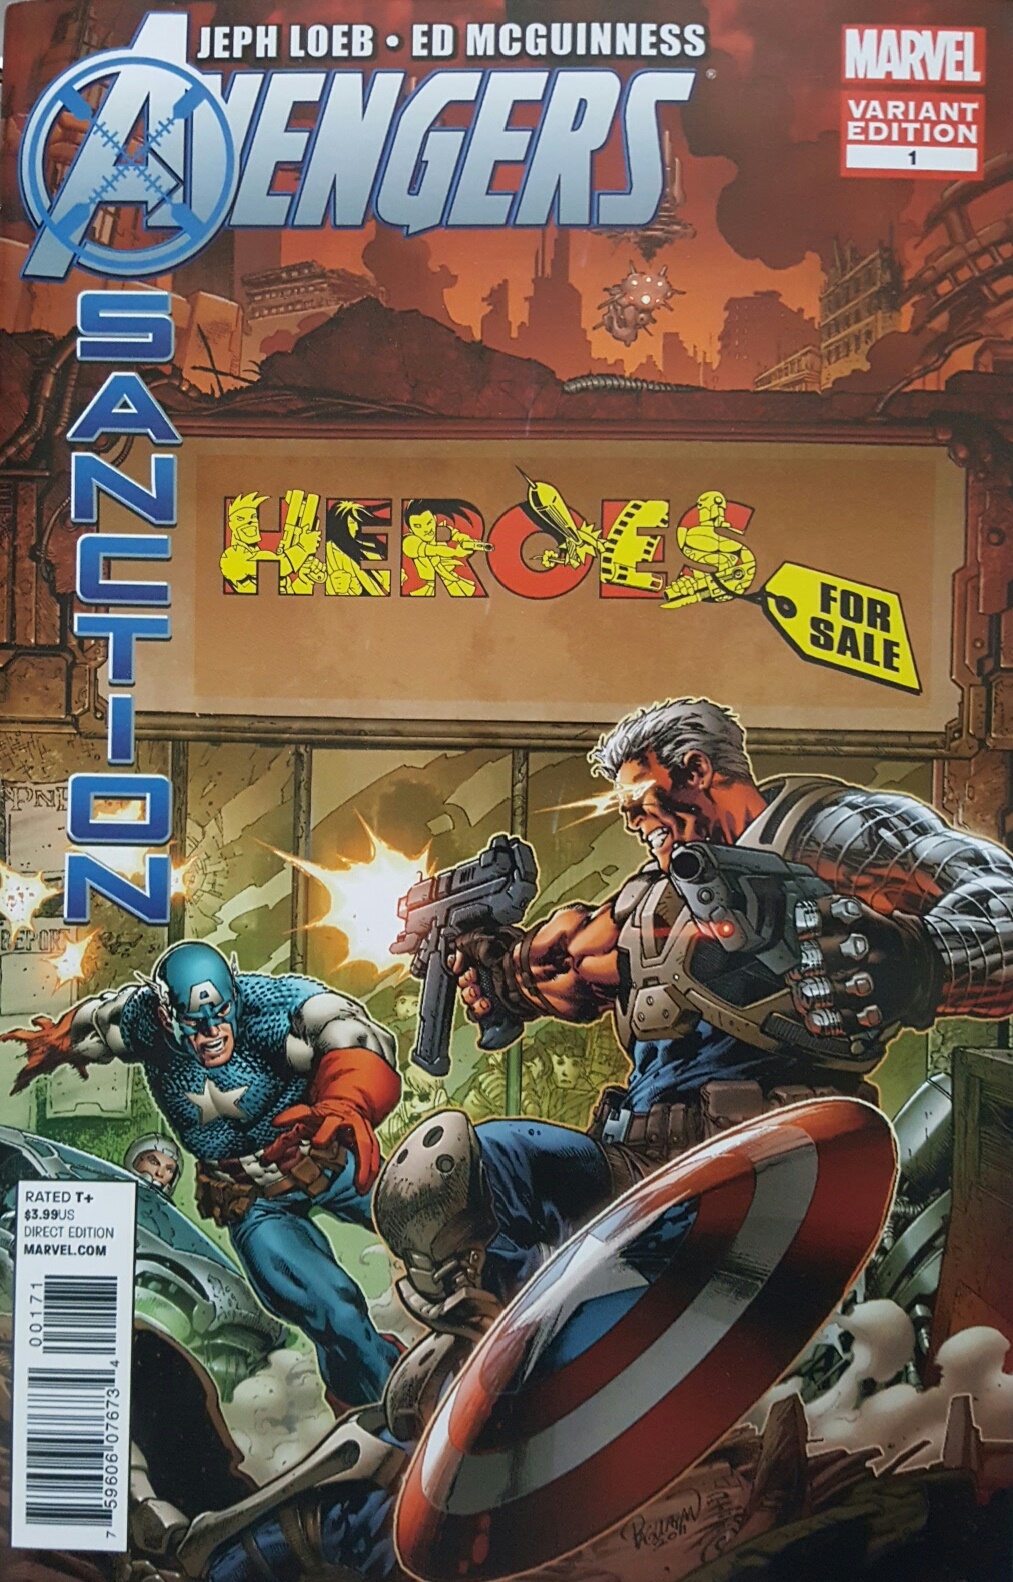 Avengers X-Sanction #1 Heroes for Sale Edition